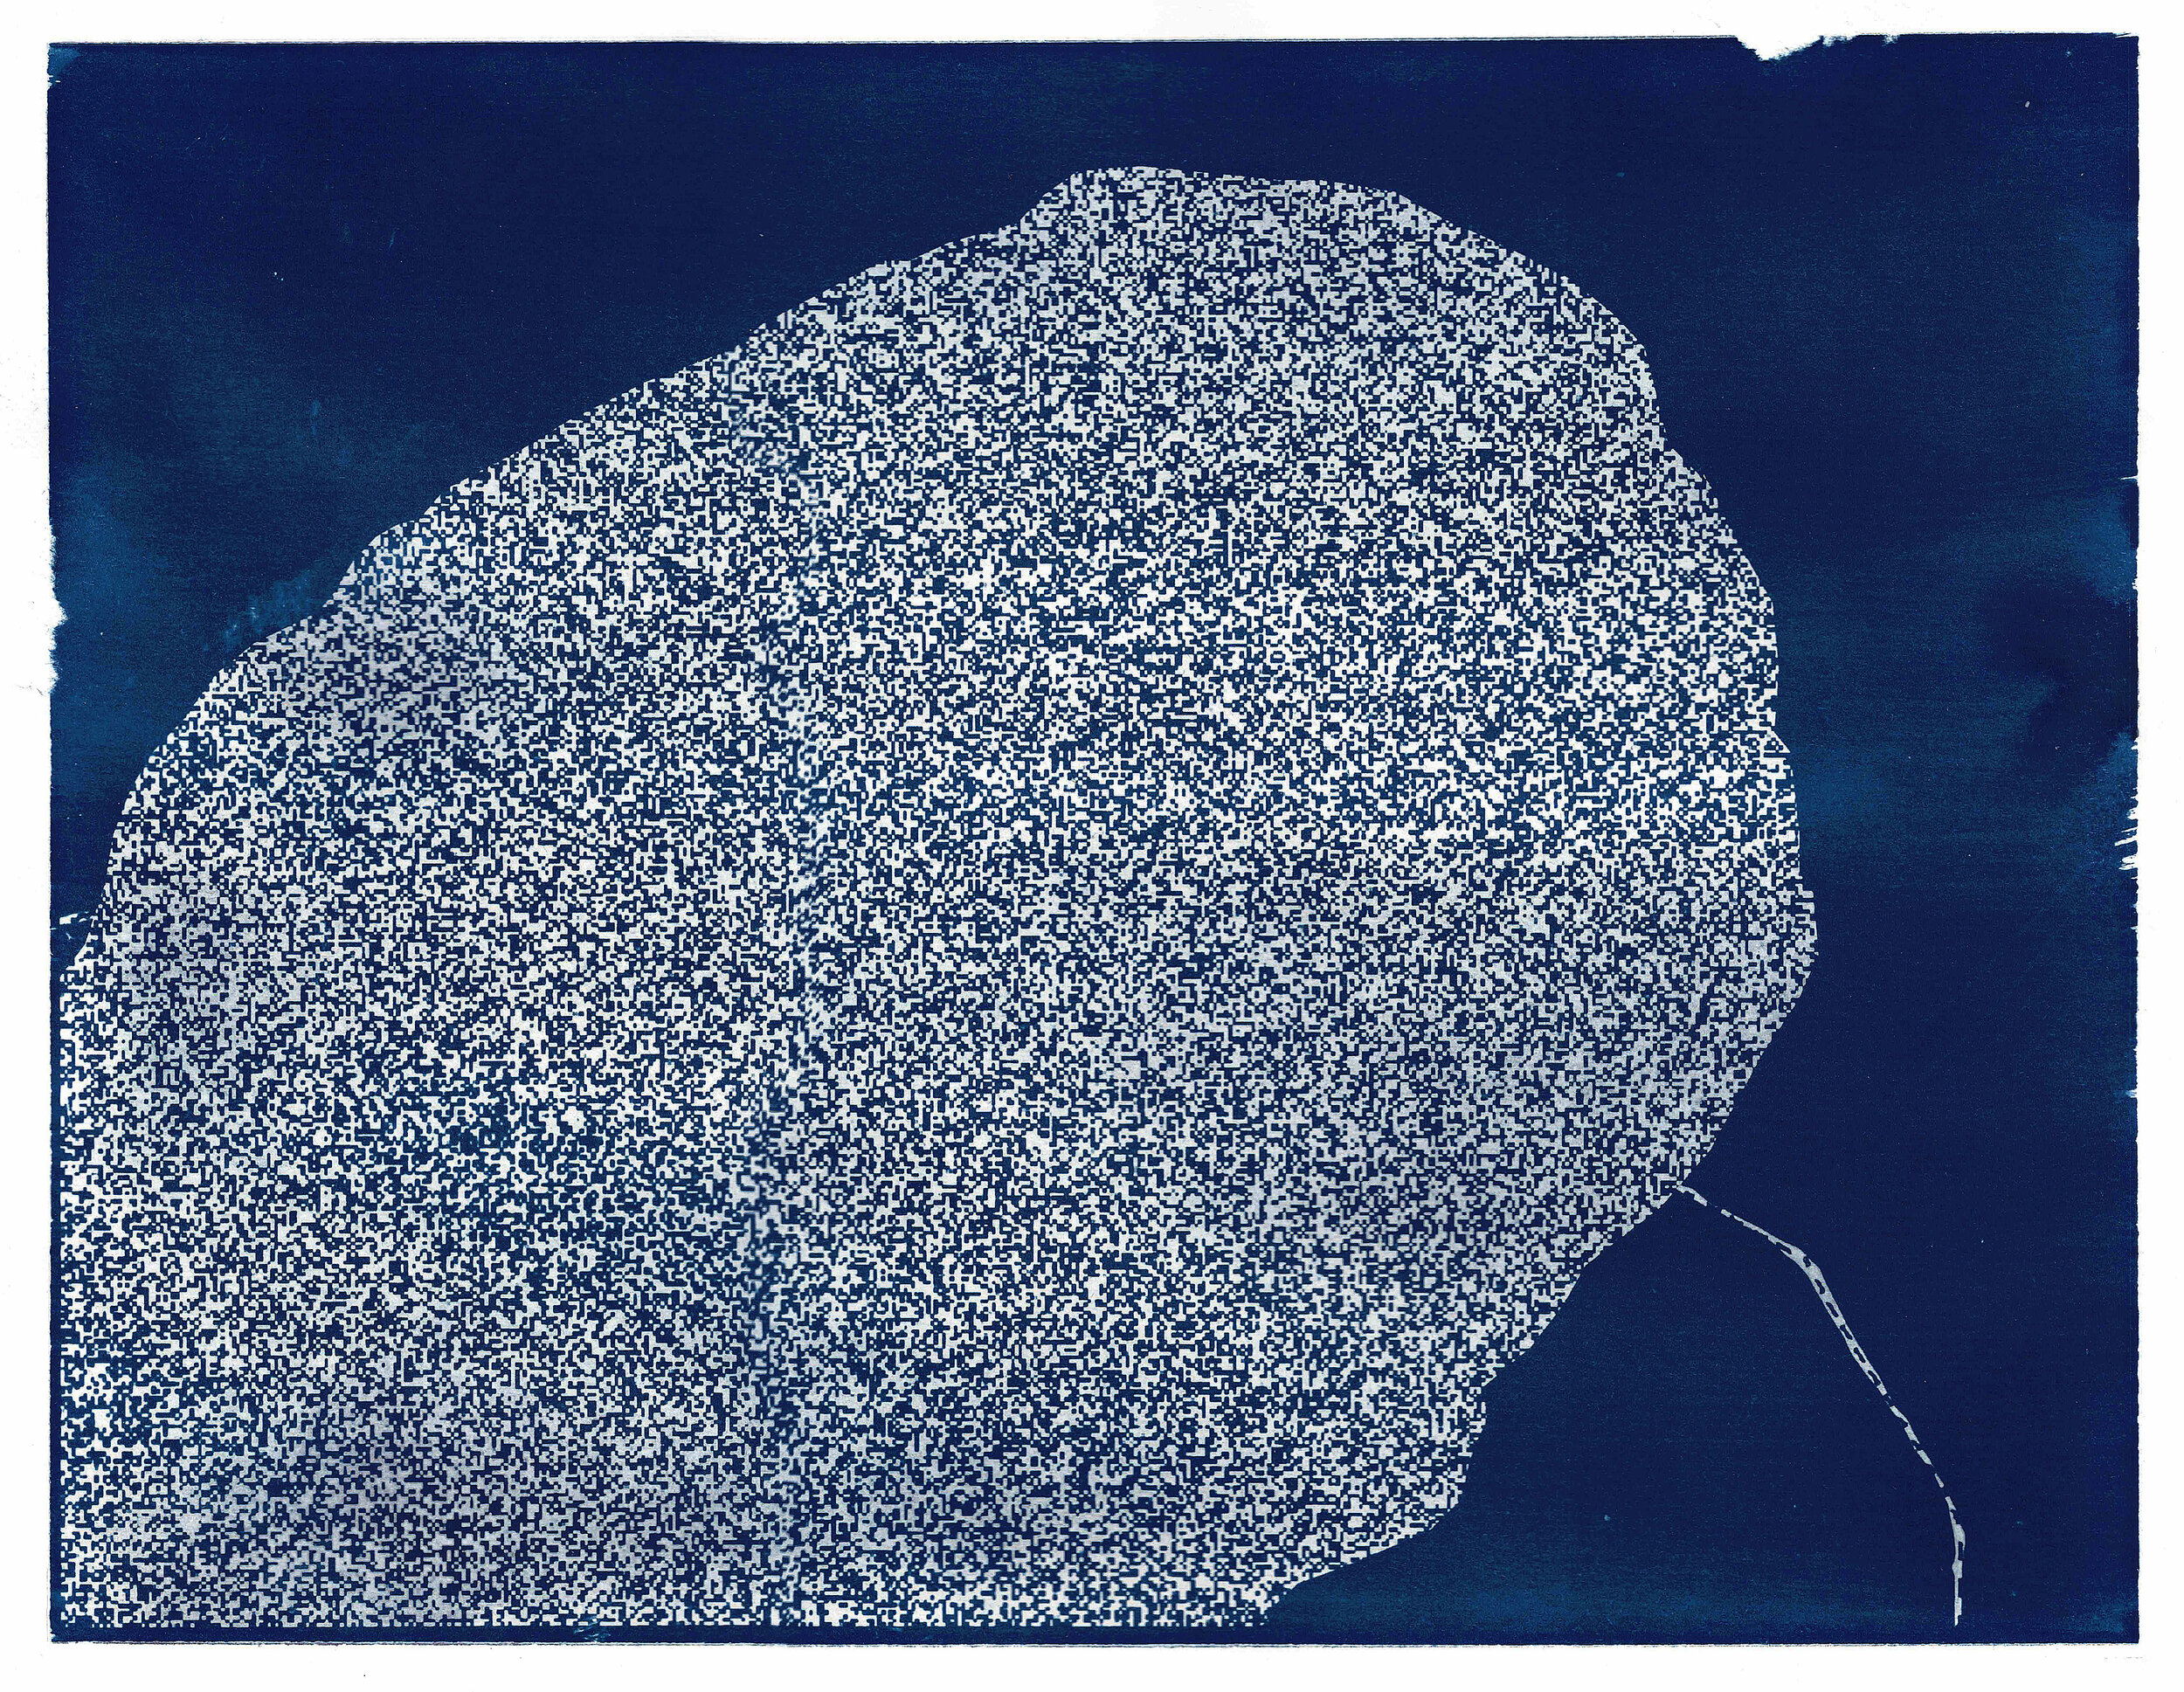   Cyanotype No. 23_Summer 2020  cyanotype on Strathmore bristol paper, 270 gsm 12 x 9 in. (30.5  x 23 cm.) variant edition of 3 2020 